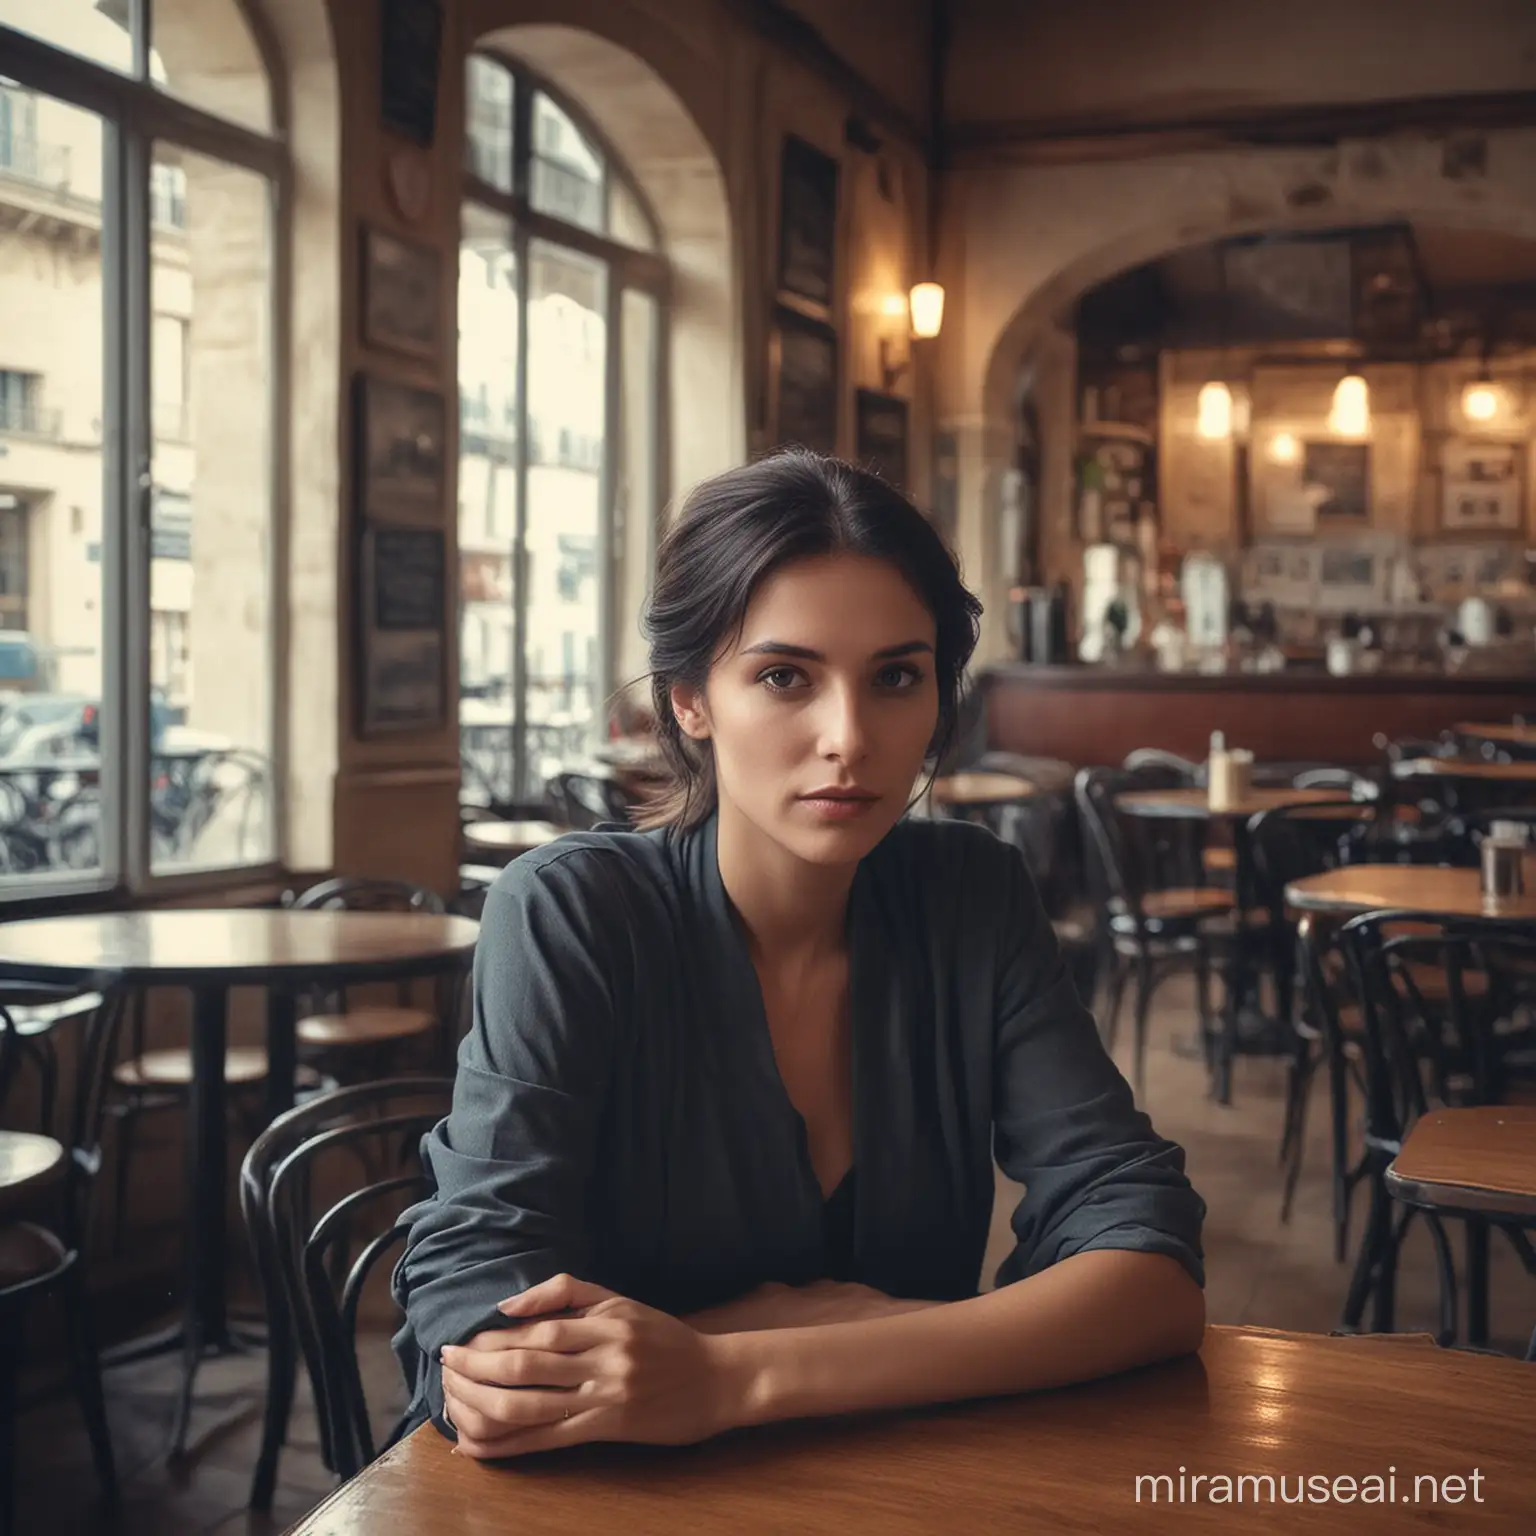 mysterious woman inside a French café